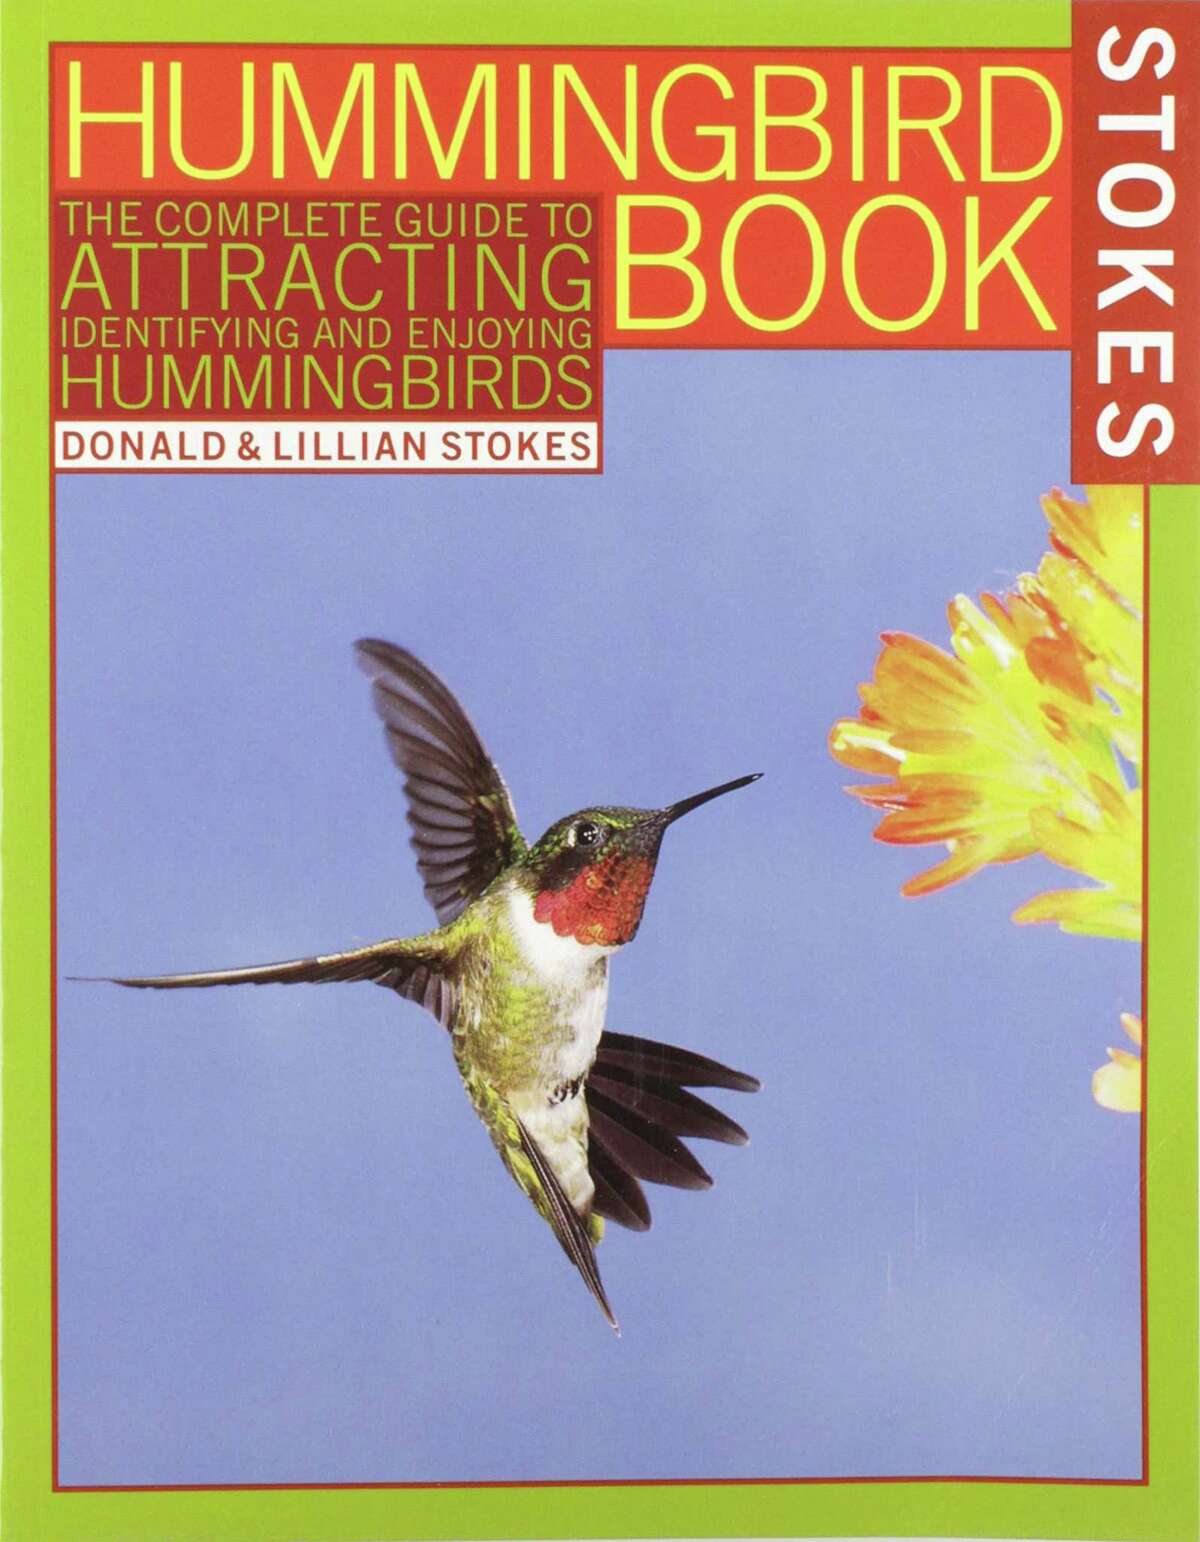 “The Hummingbird Book: The Complete Guide to Attracting, Identifying, and Enjoying Hummingbirds” by Donald and Lillian Stokes